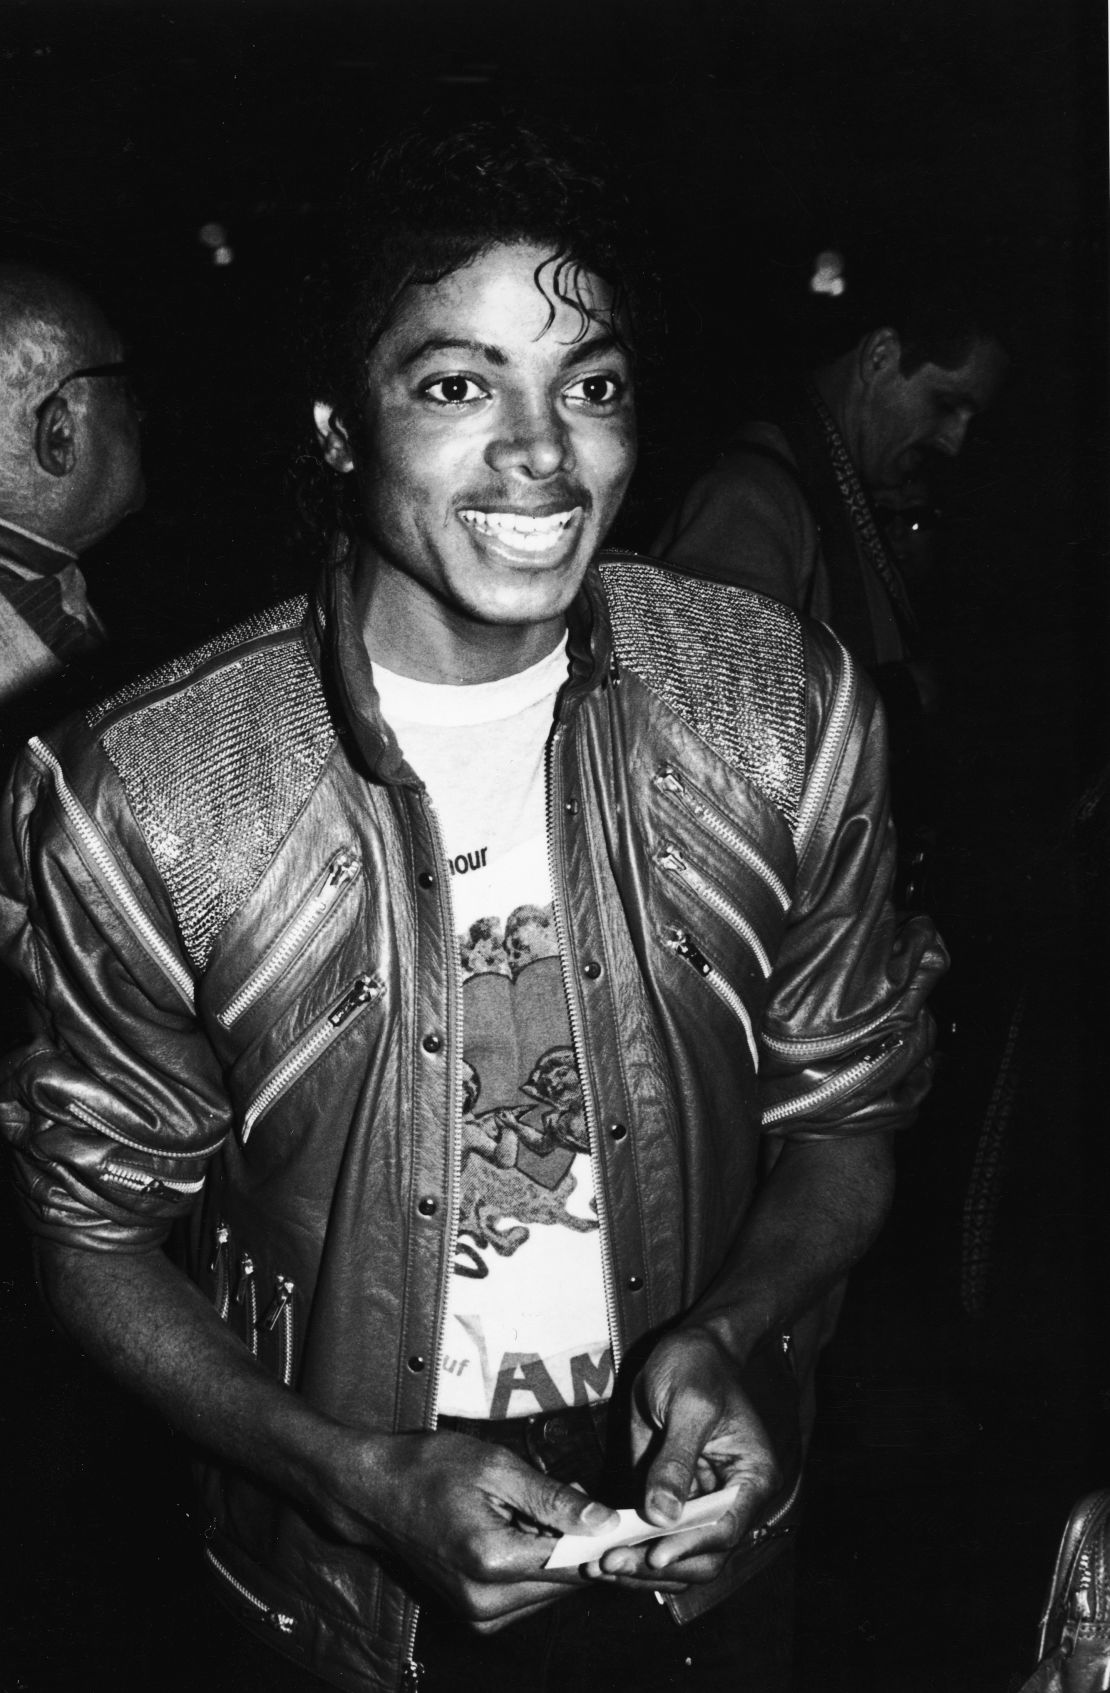 Michael Jackson at the Los Angeles premiere of the musical 'Dreamgirls' in 1983.